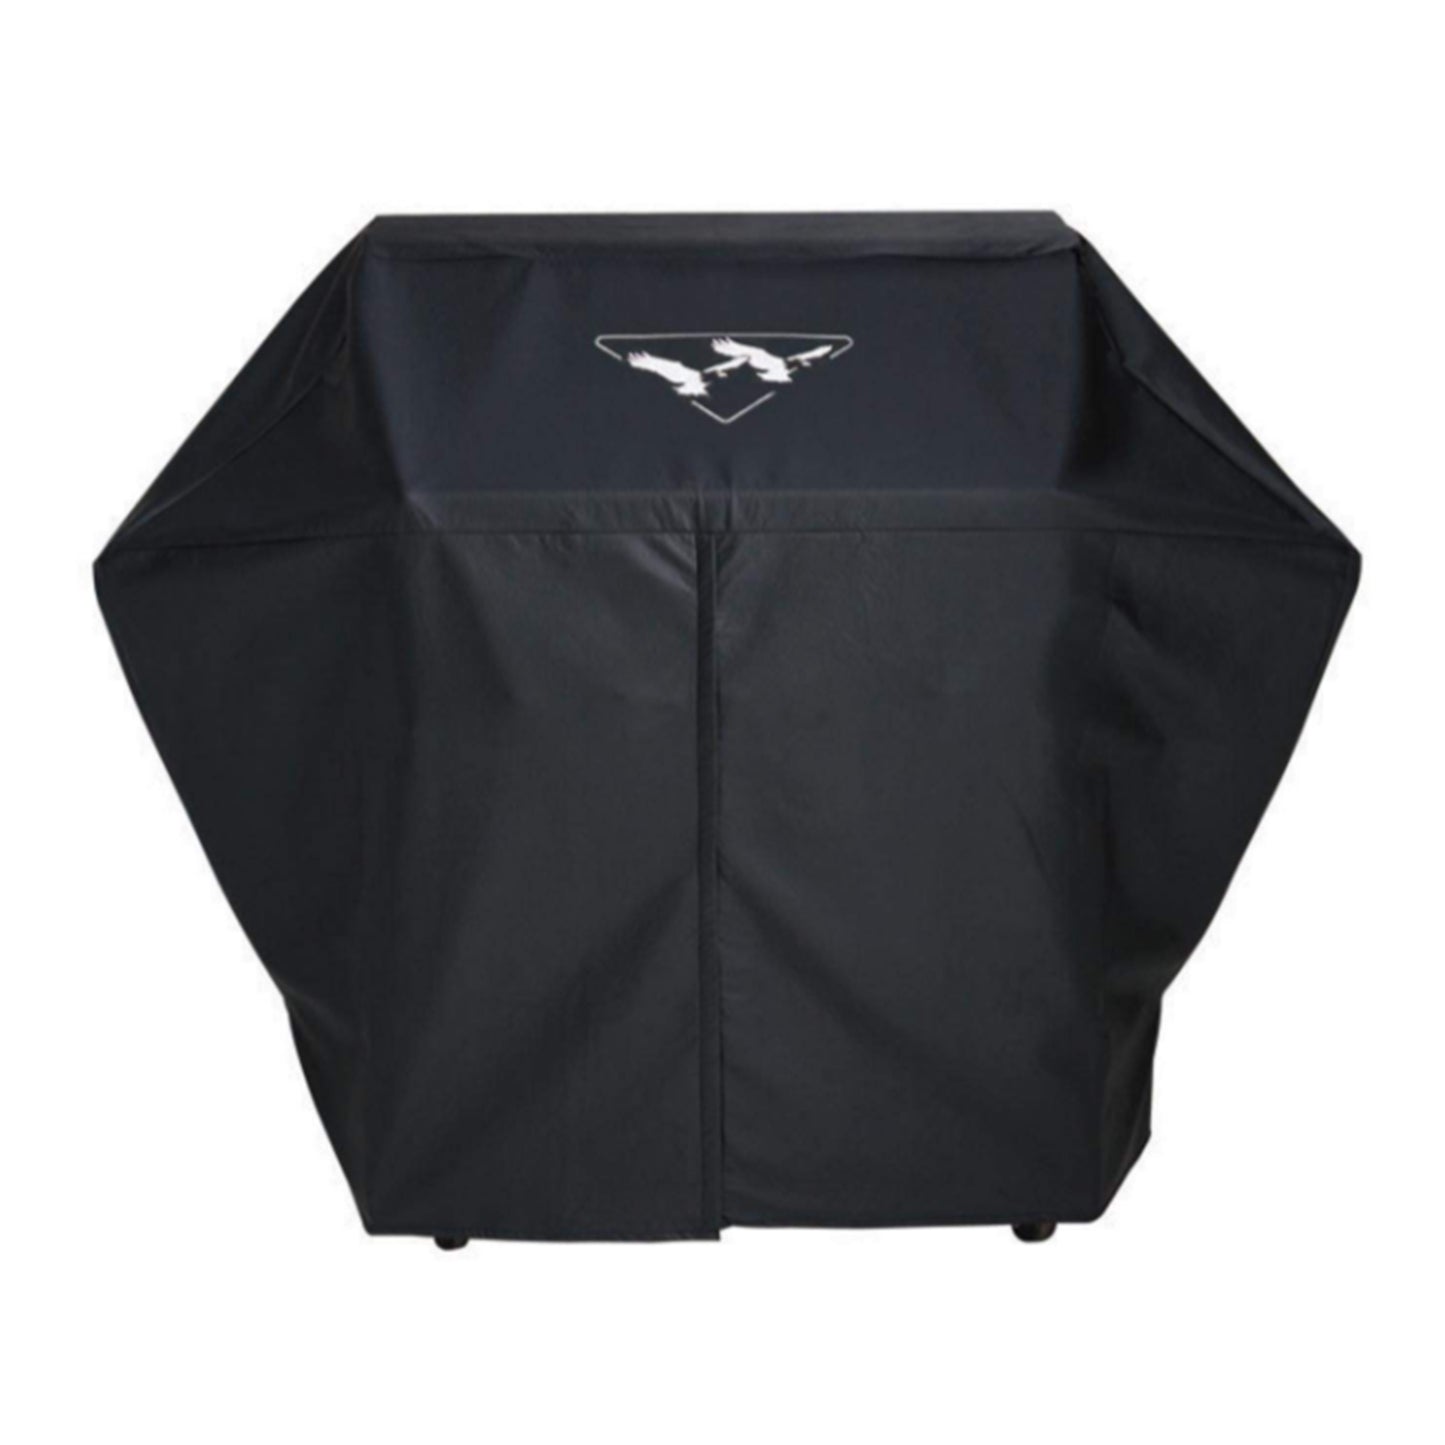 Twin Eagles Vinyl Grill Cover For Freestanding Grills